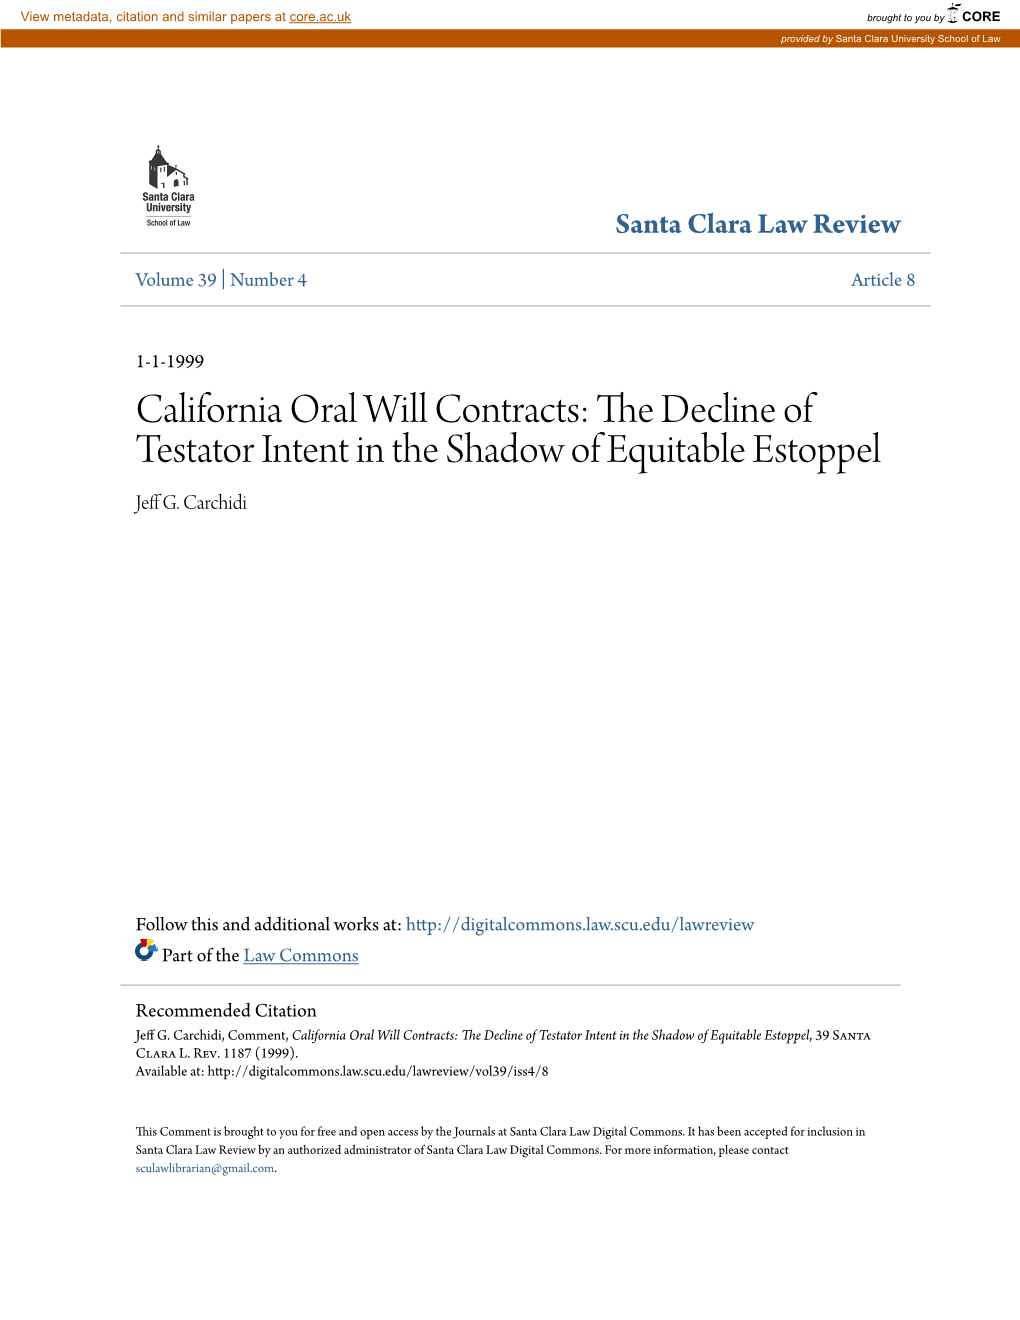 California Oral Will Contracts: the Decline of Testator Intent in the Shadow of Equitable Estoppel, 39 Santa Clara L